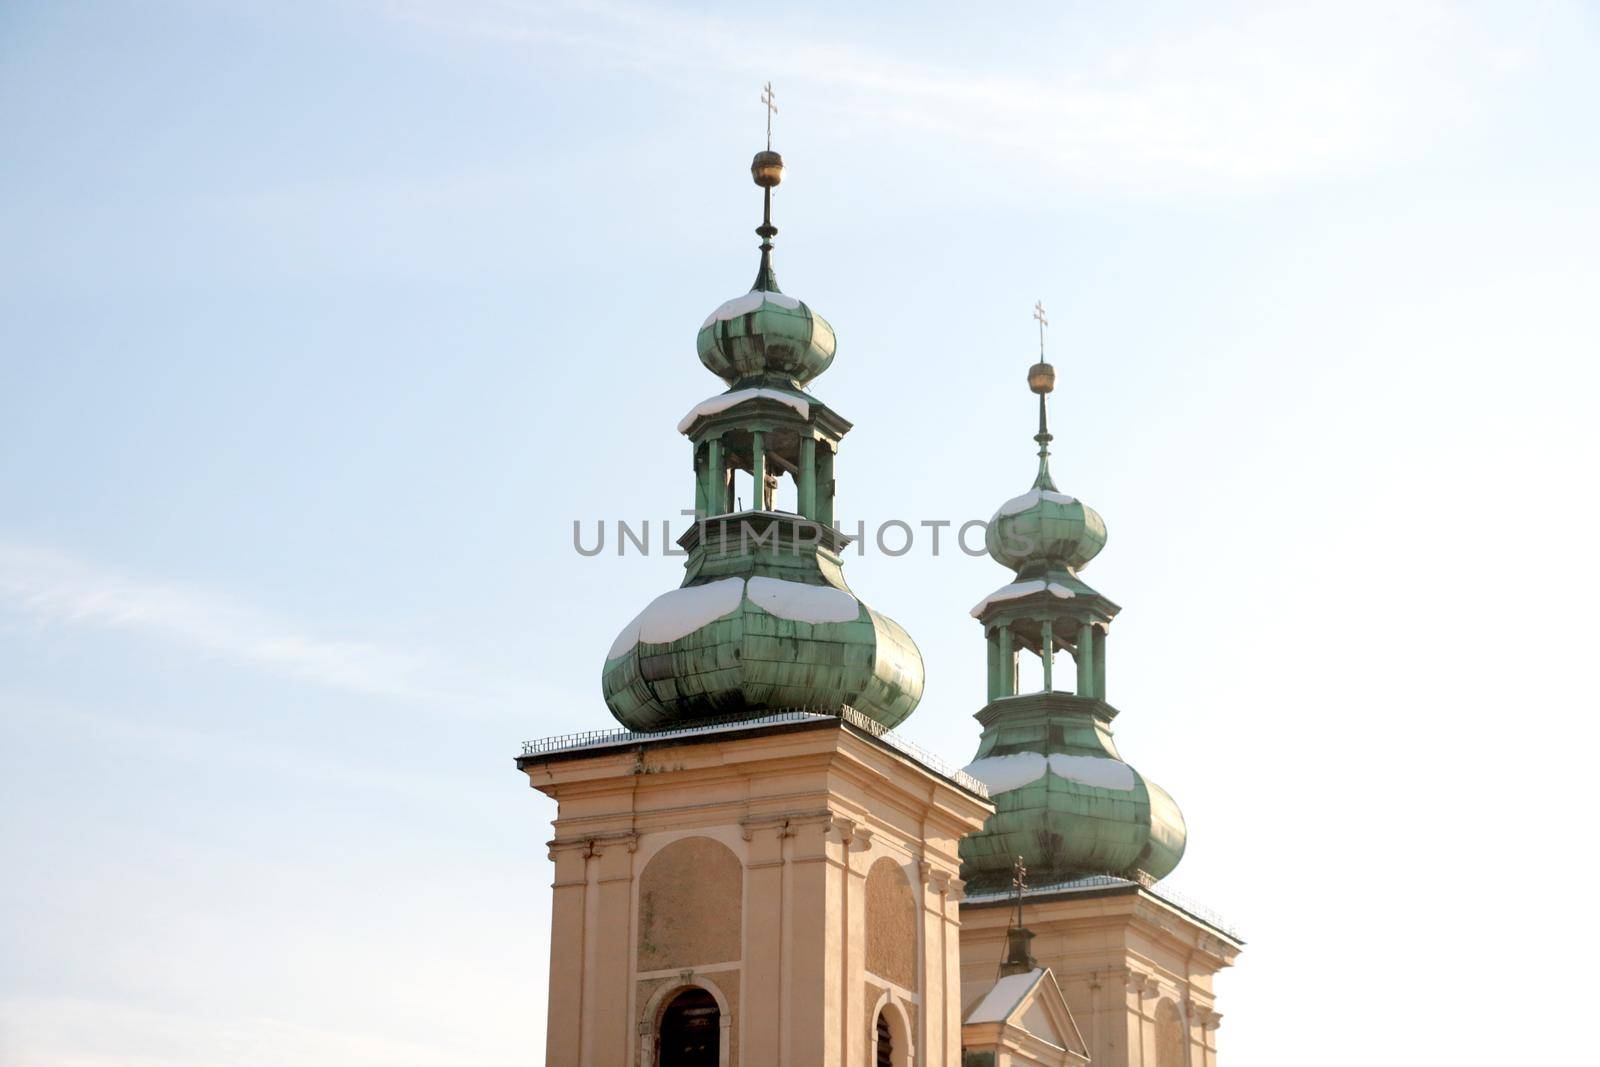 Domes of the church against the blue sky